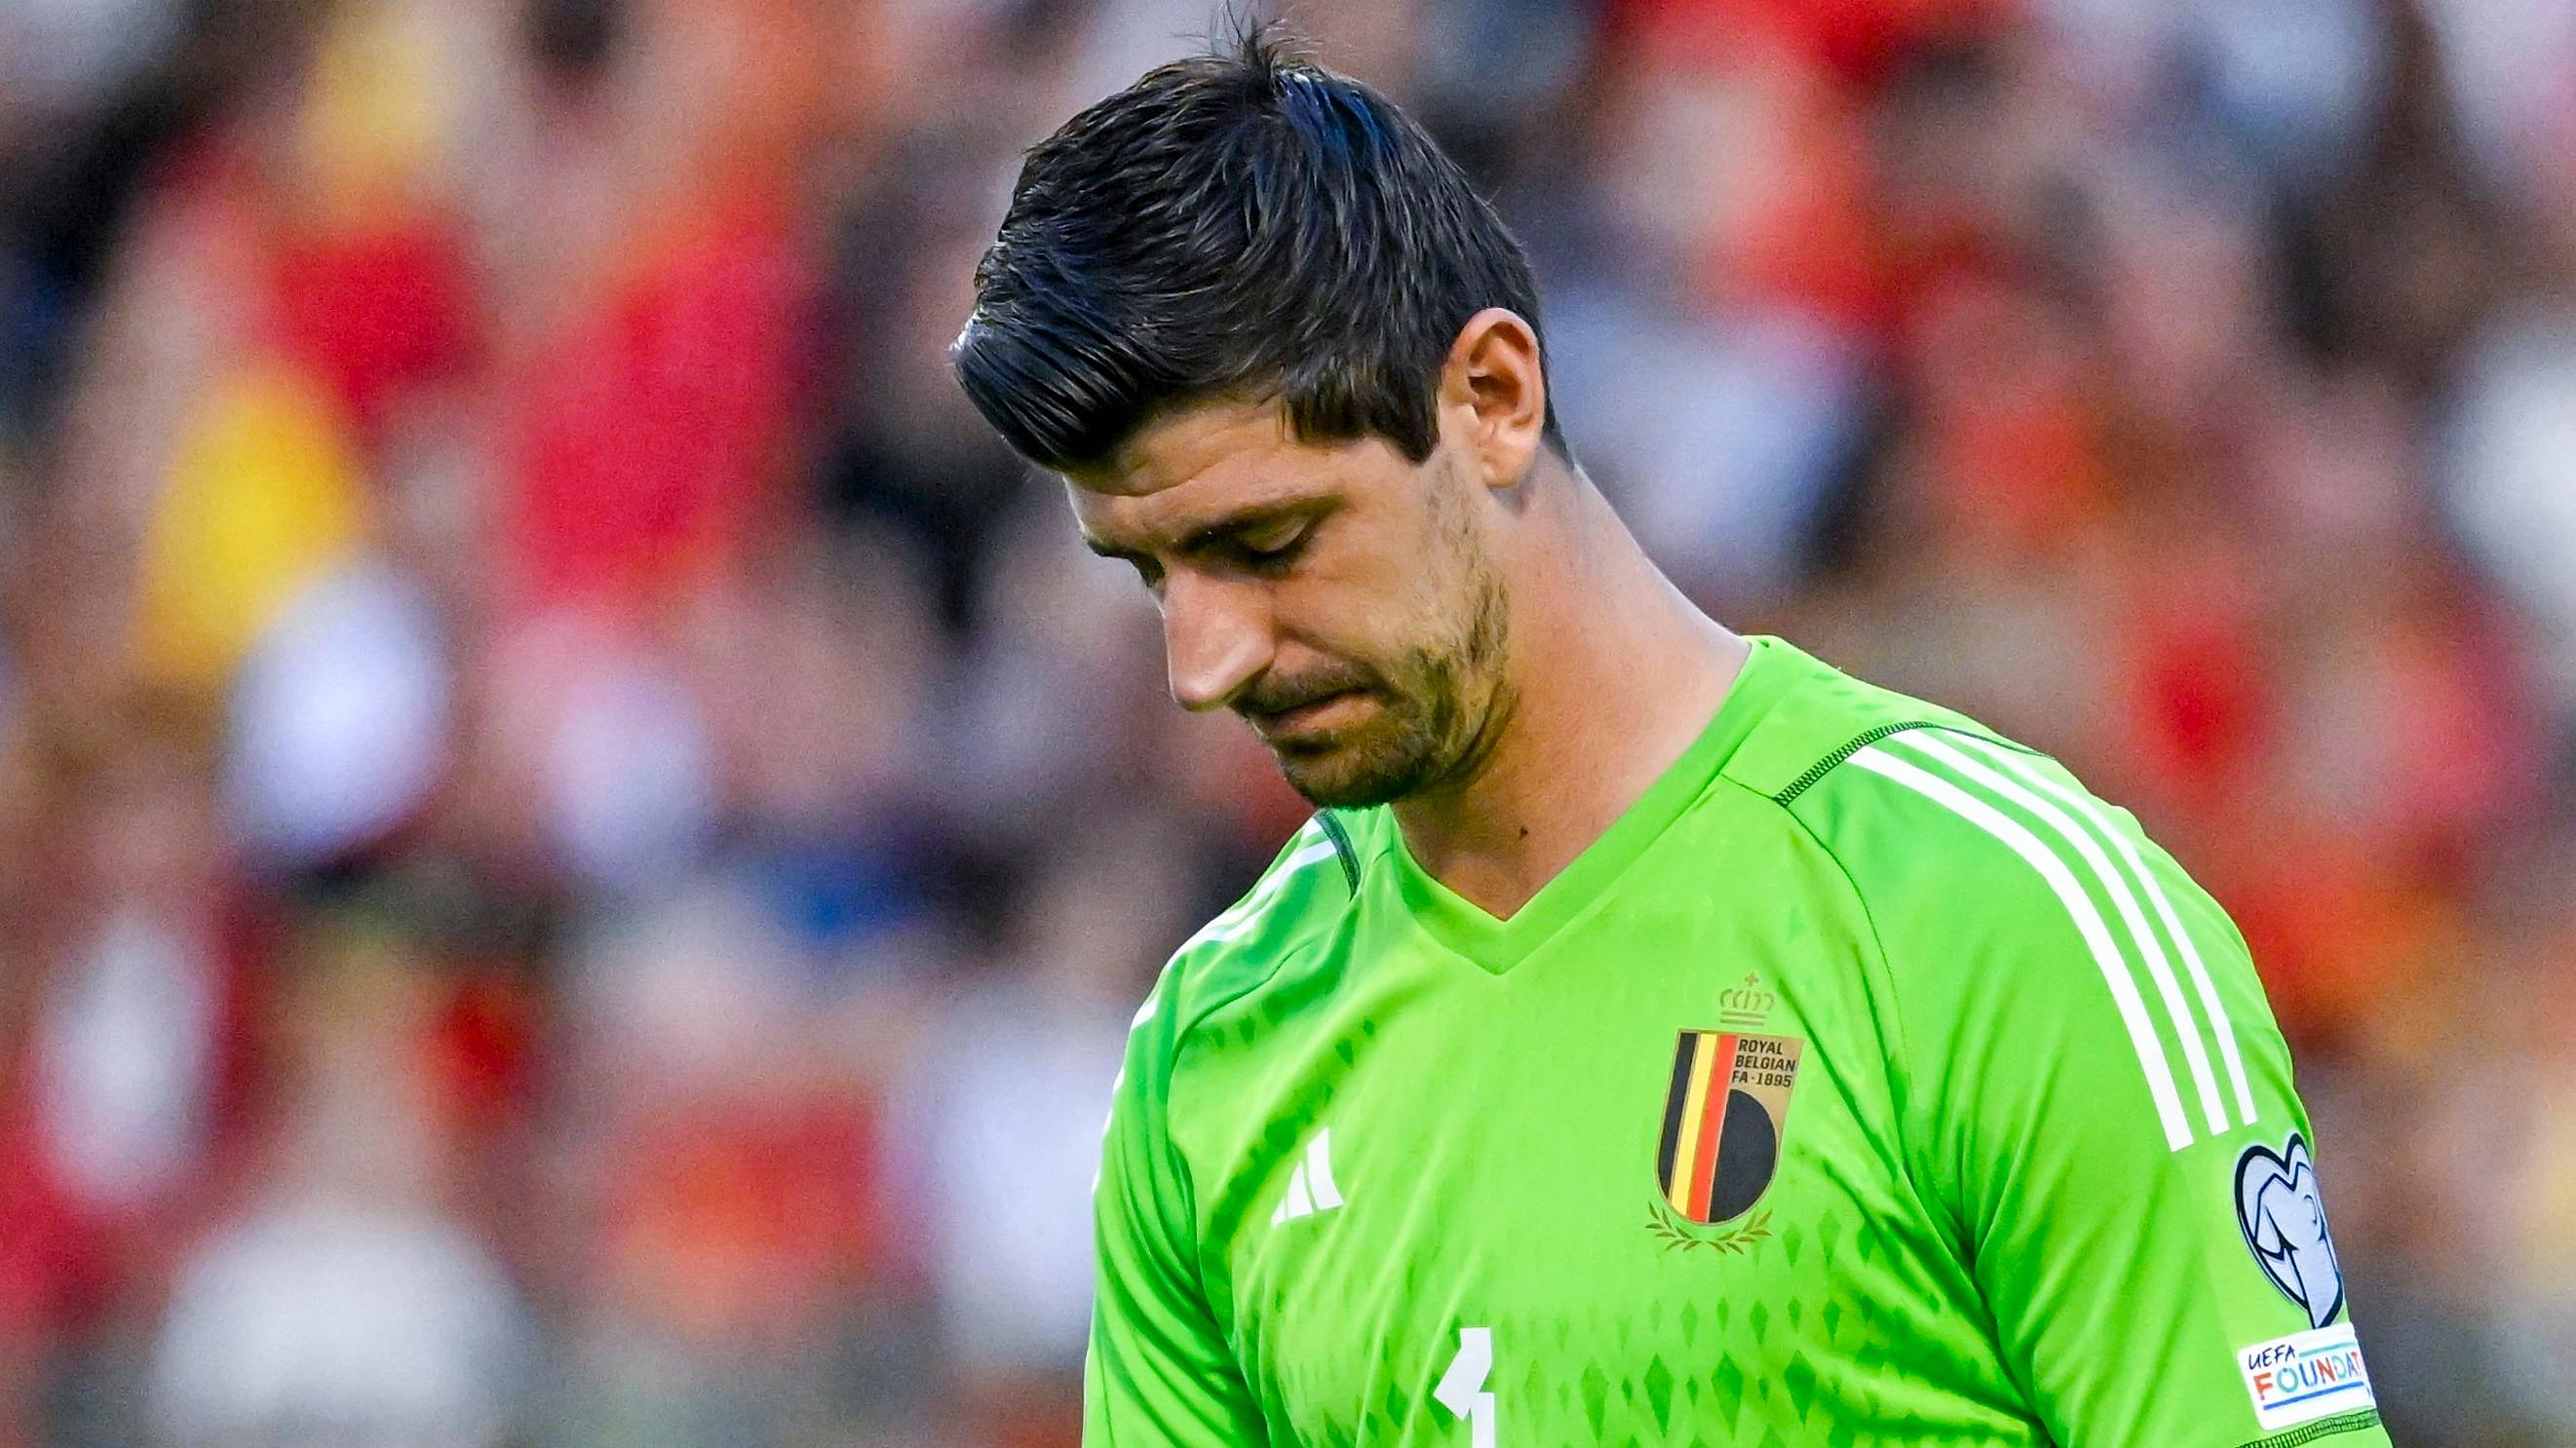 Football: Thibaut Courtois continues to raise tension with his coach